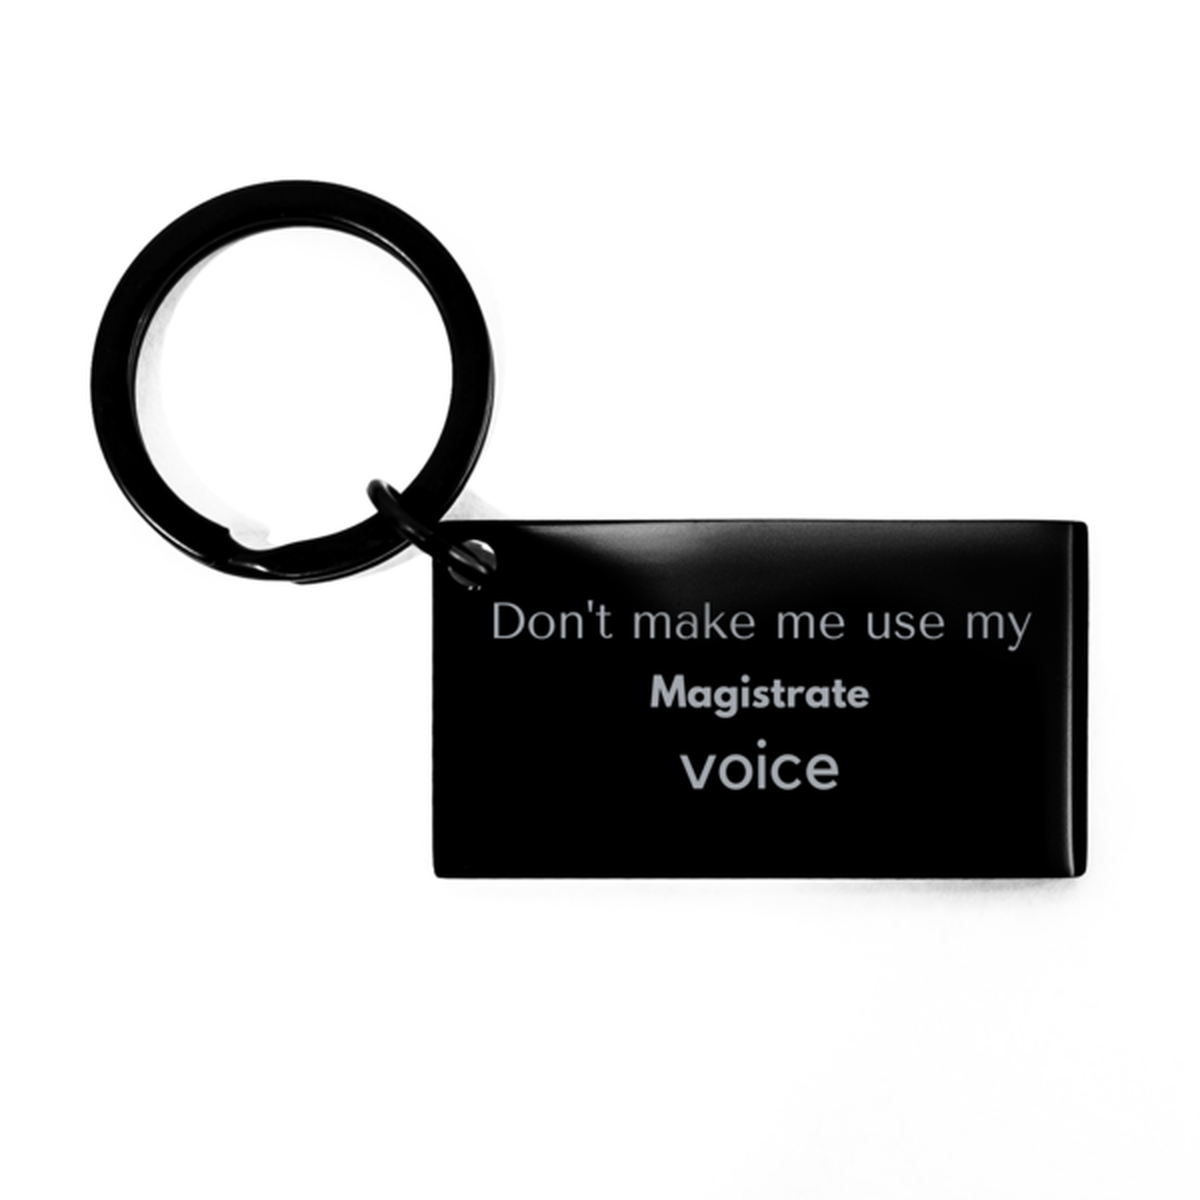 Don't make me use my Magistrate voice, Sarcasm Magistrate Gifts, Christmas Magistrate Keychain Birthday Unique Gifts For Magistrate Coworkers, Men, Women, Colleague, Friends